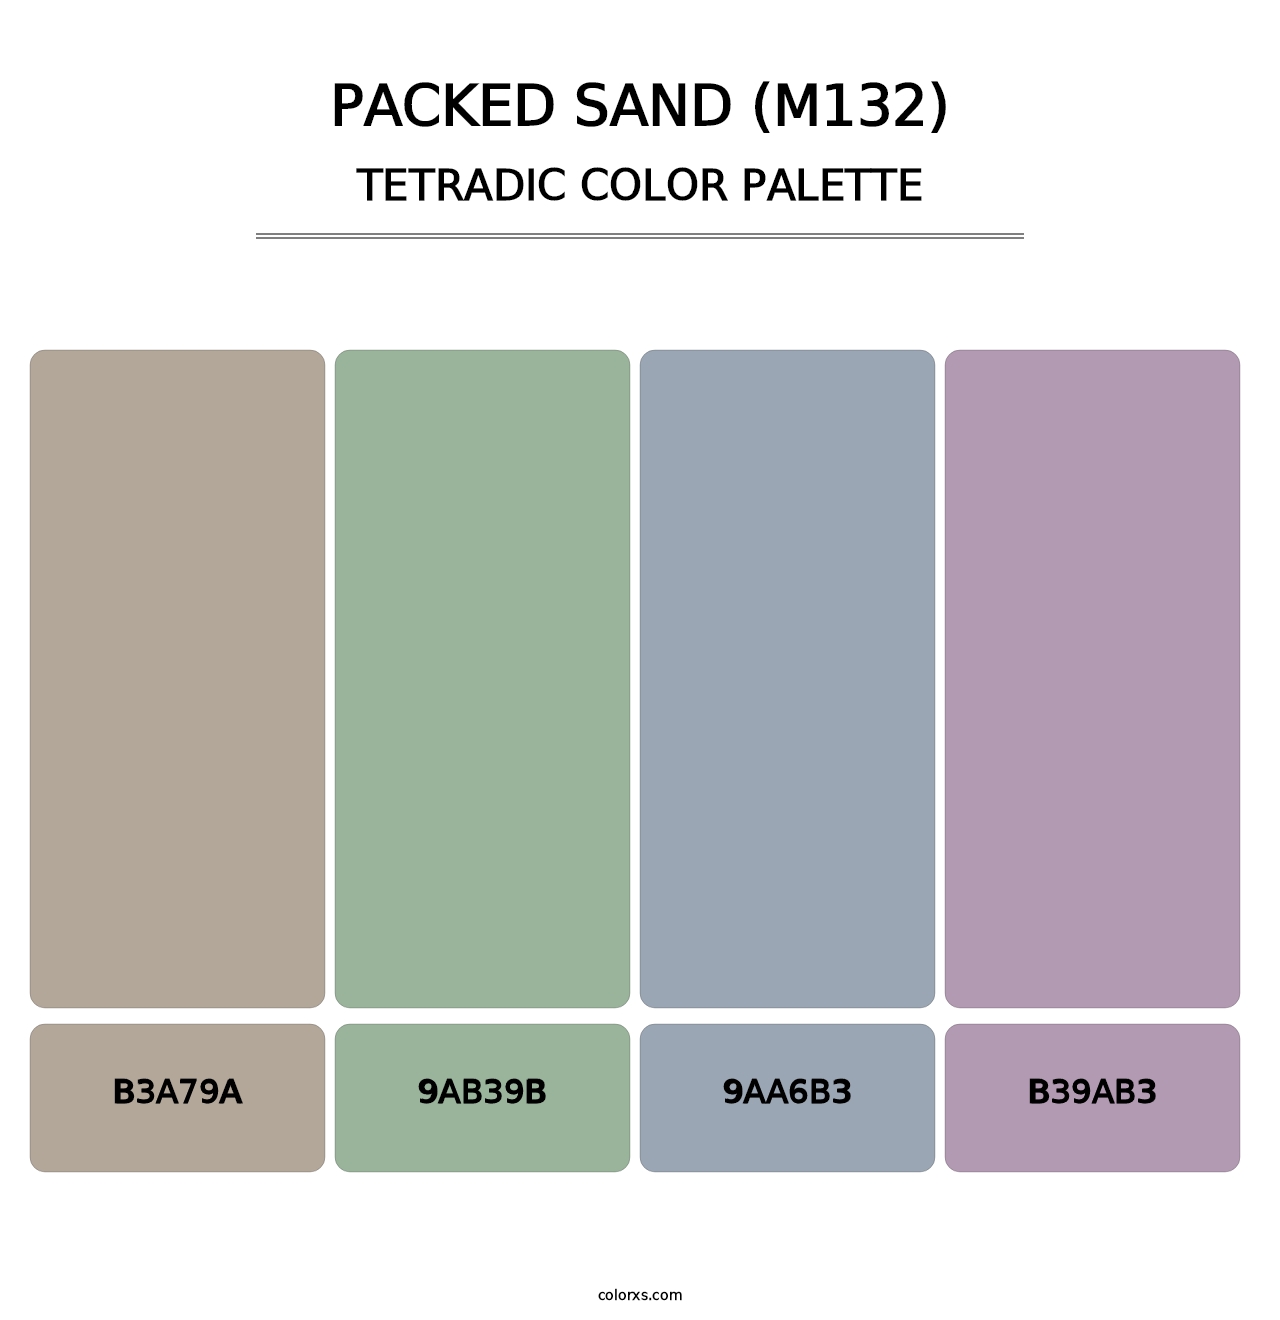 Packed Sand (M132) - Tetradic Color Palette